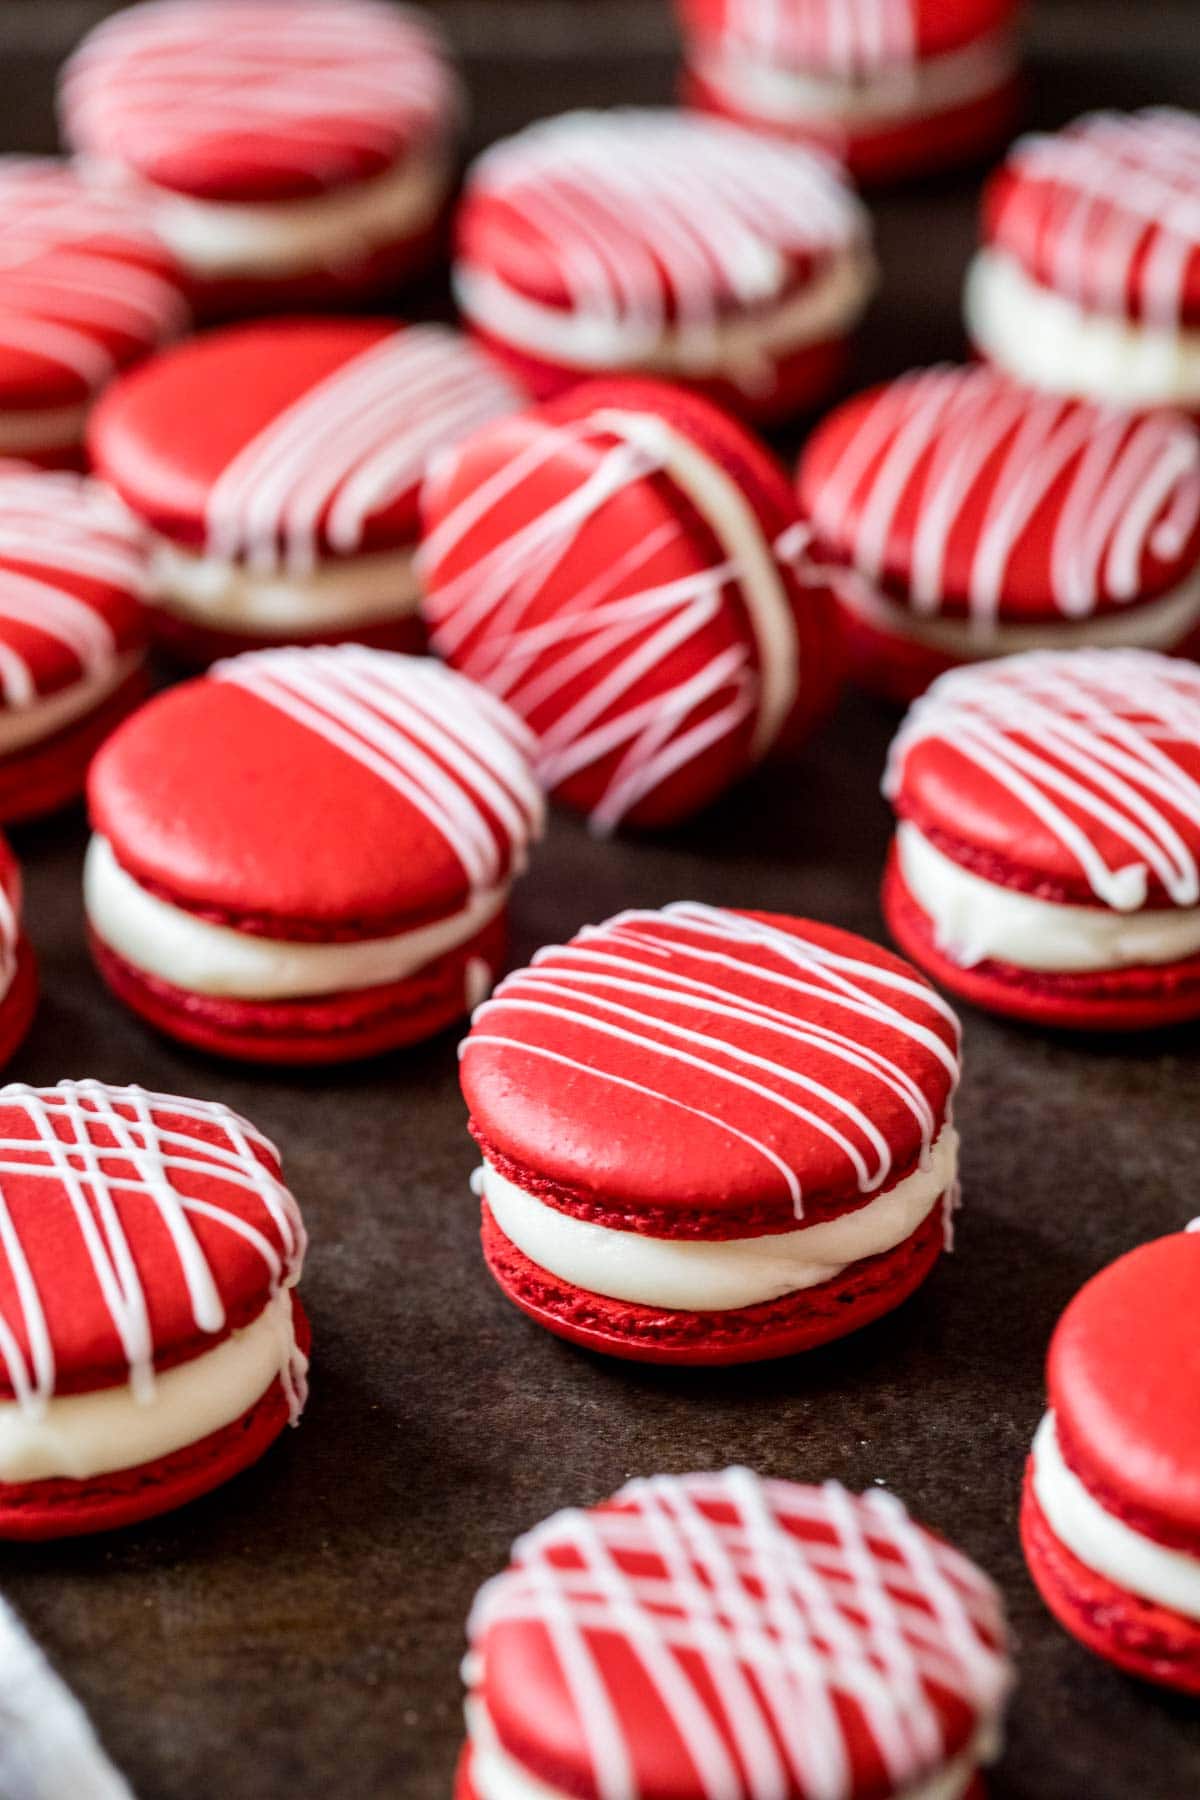 Red velvet macarons with a thin white chocolate drizzle on top resting on a dark surface.